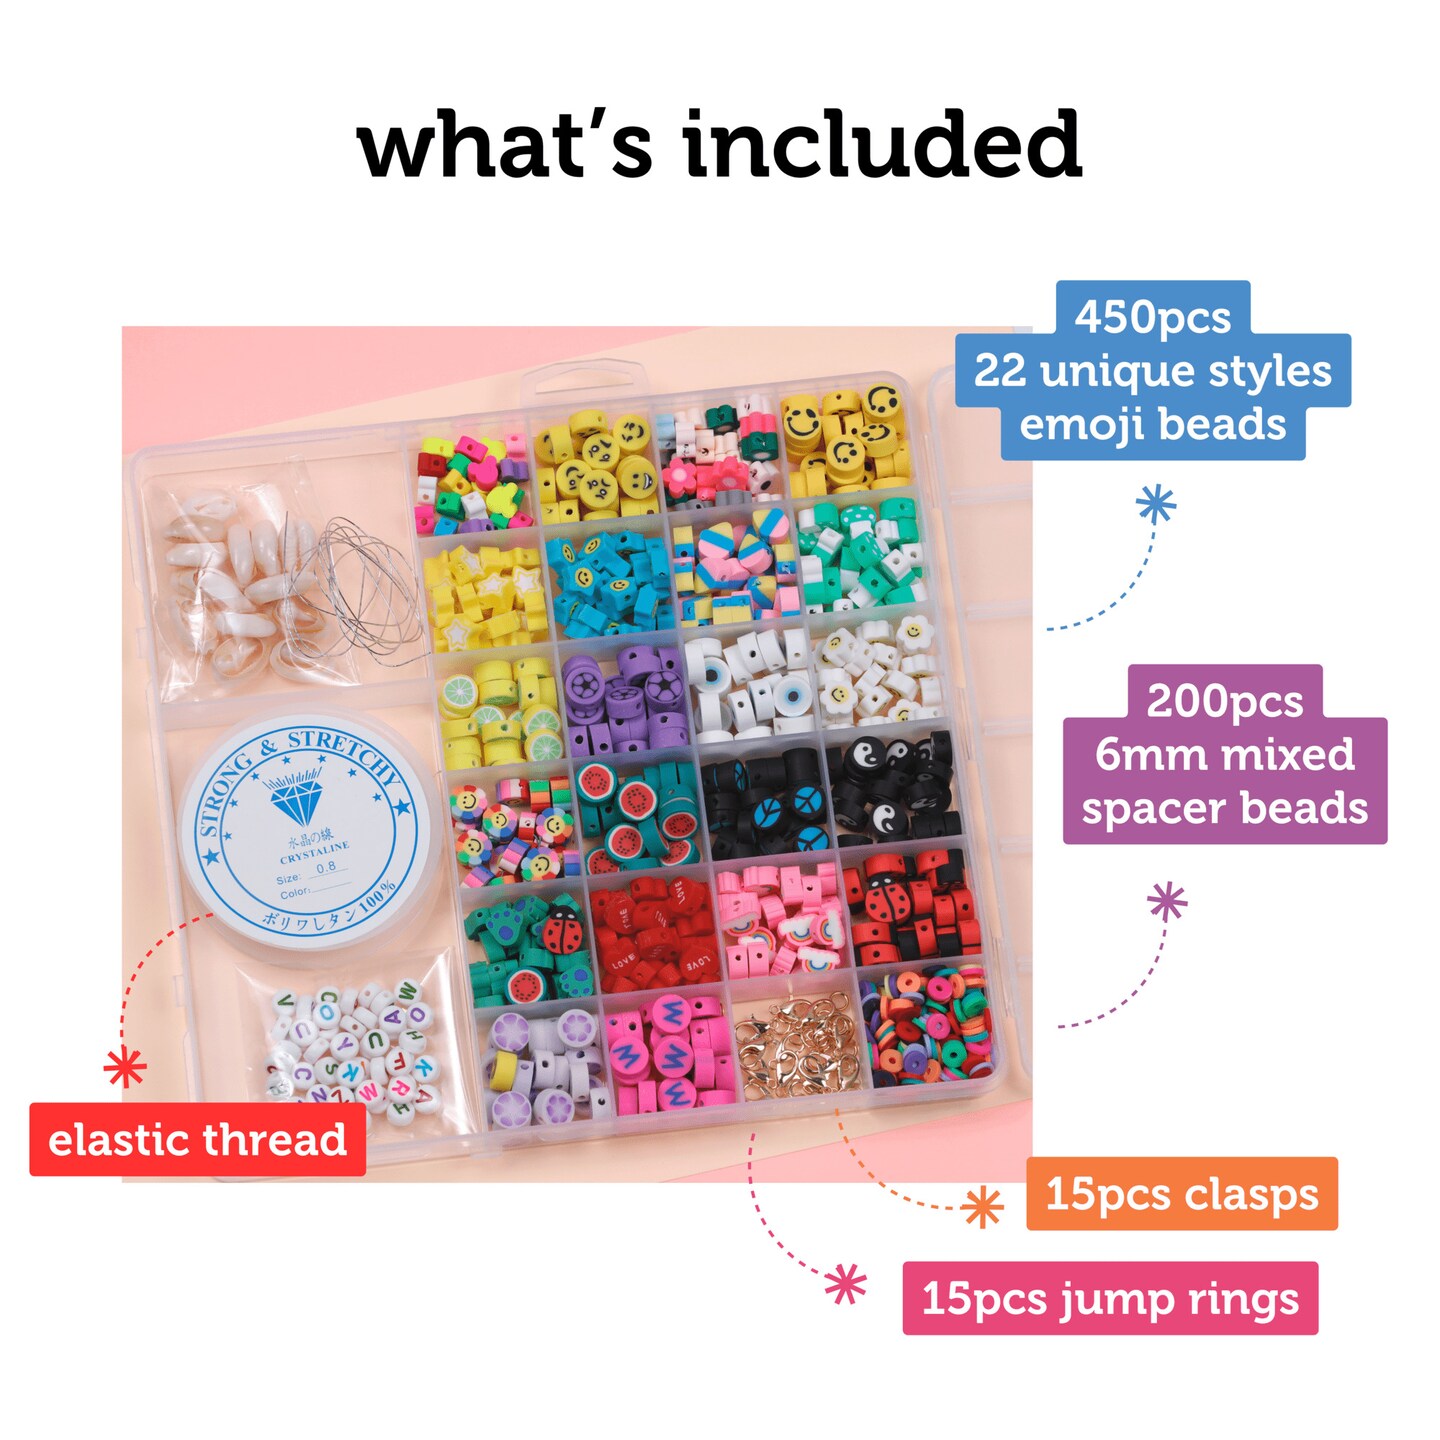 300 Pcs Smiley Face Beads Kit With Crystal String, 10mm Happy Face Loose  Spacer Beads Cute Smiley Preppy Flat Round Beads For Diy Bracelet Jewelry  Mak